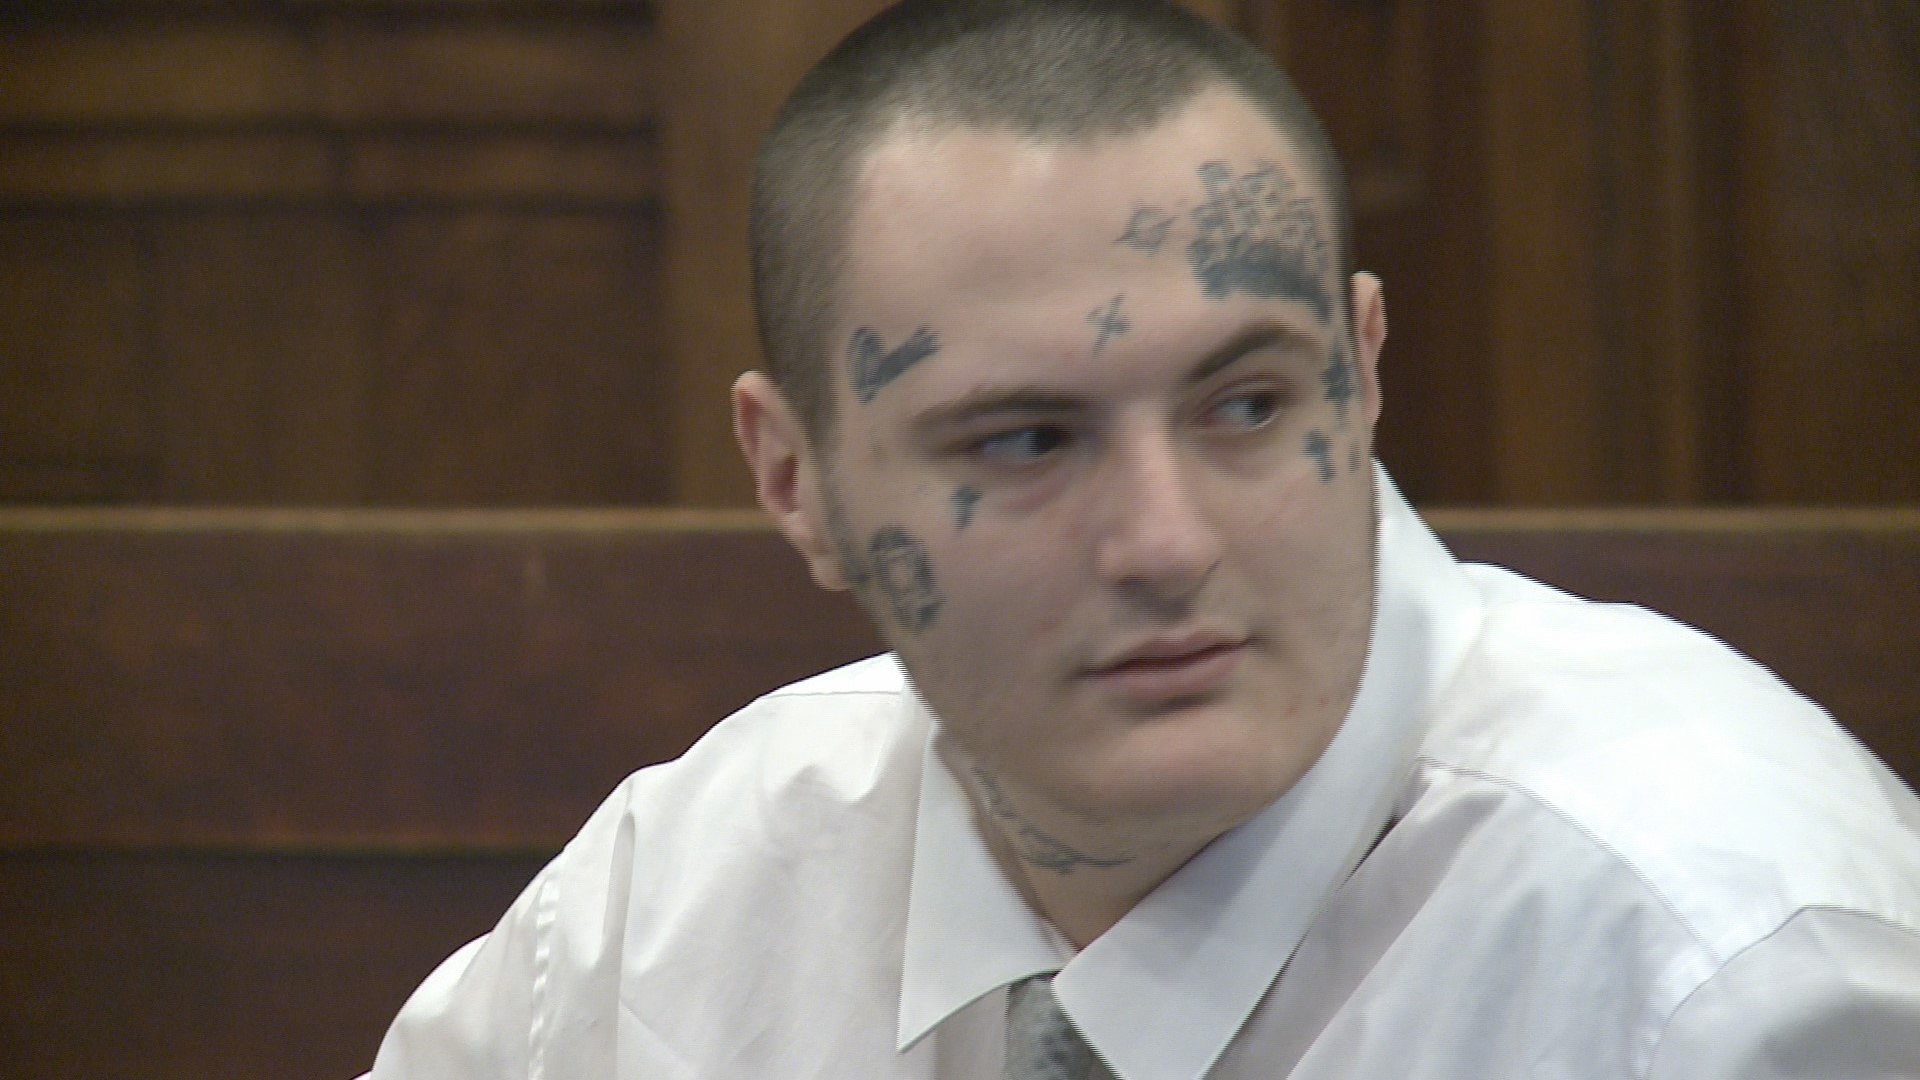 The jury trial for Damion Butterfield, 24, of Saco began on Dec. 6. Butterfield was indicted on murder, attempted murder, and robbery charges.